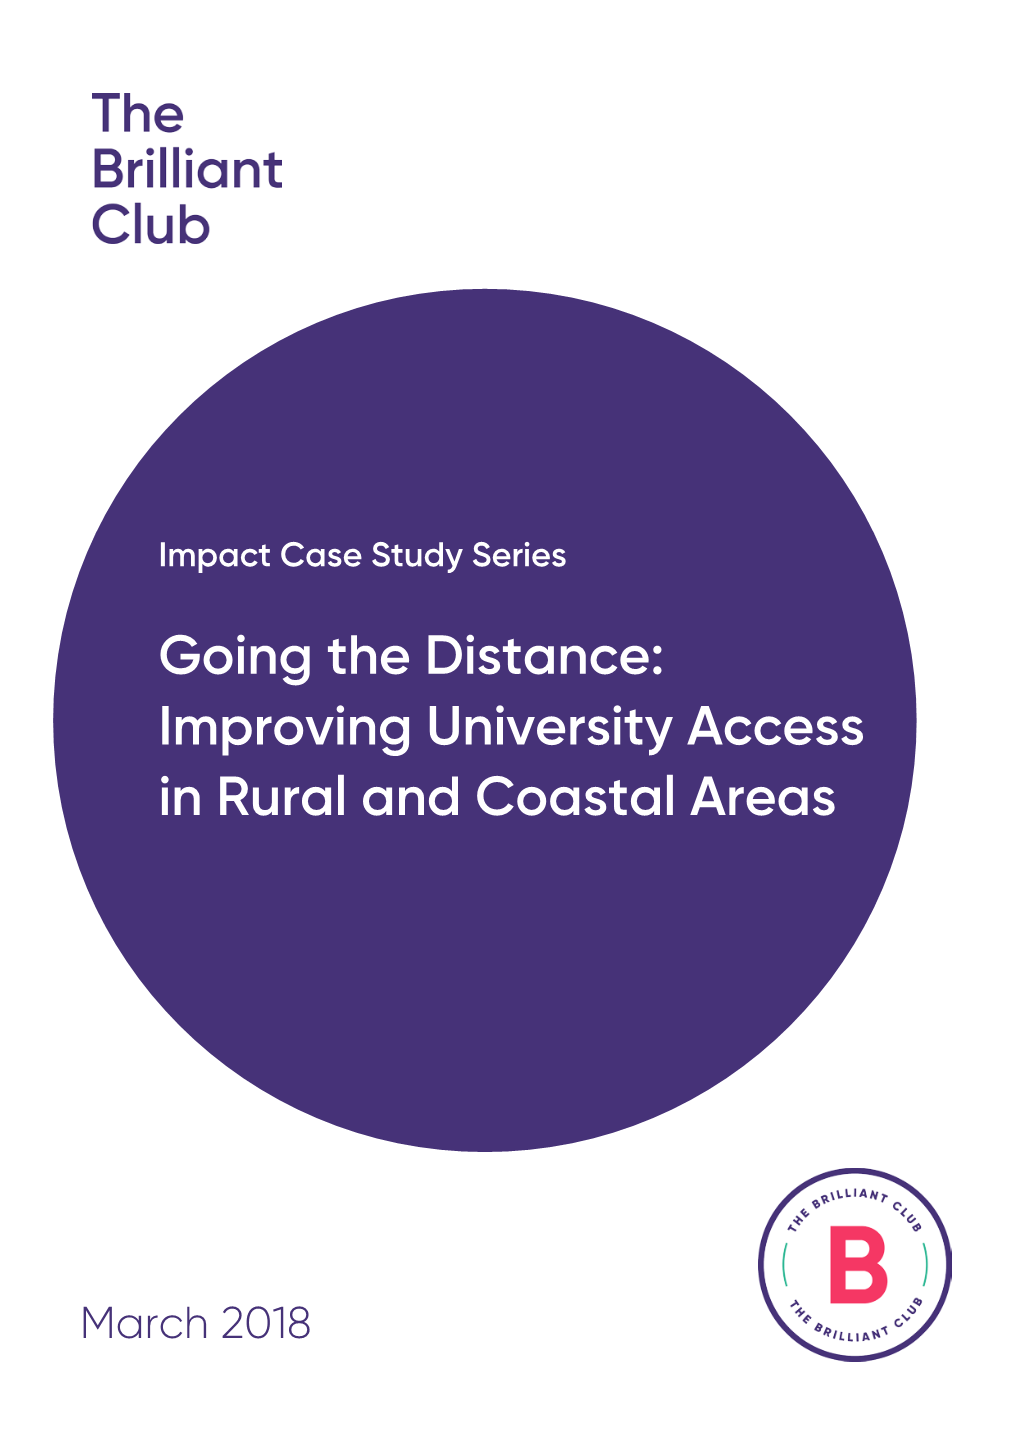 Improving University Access in Rural and Coastal Areas